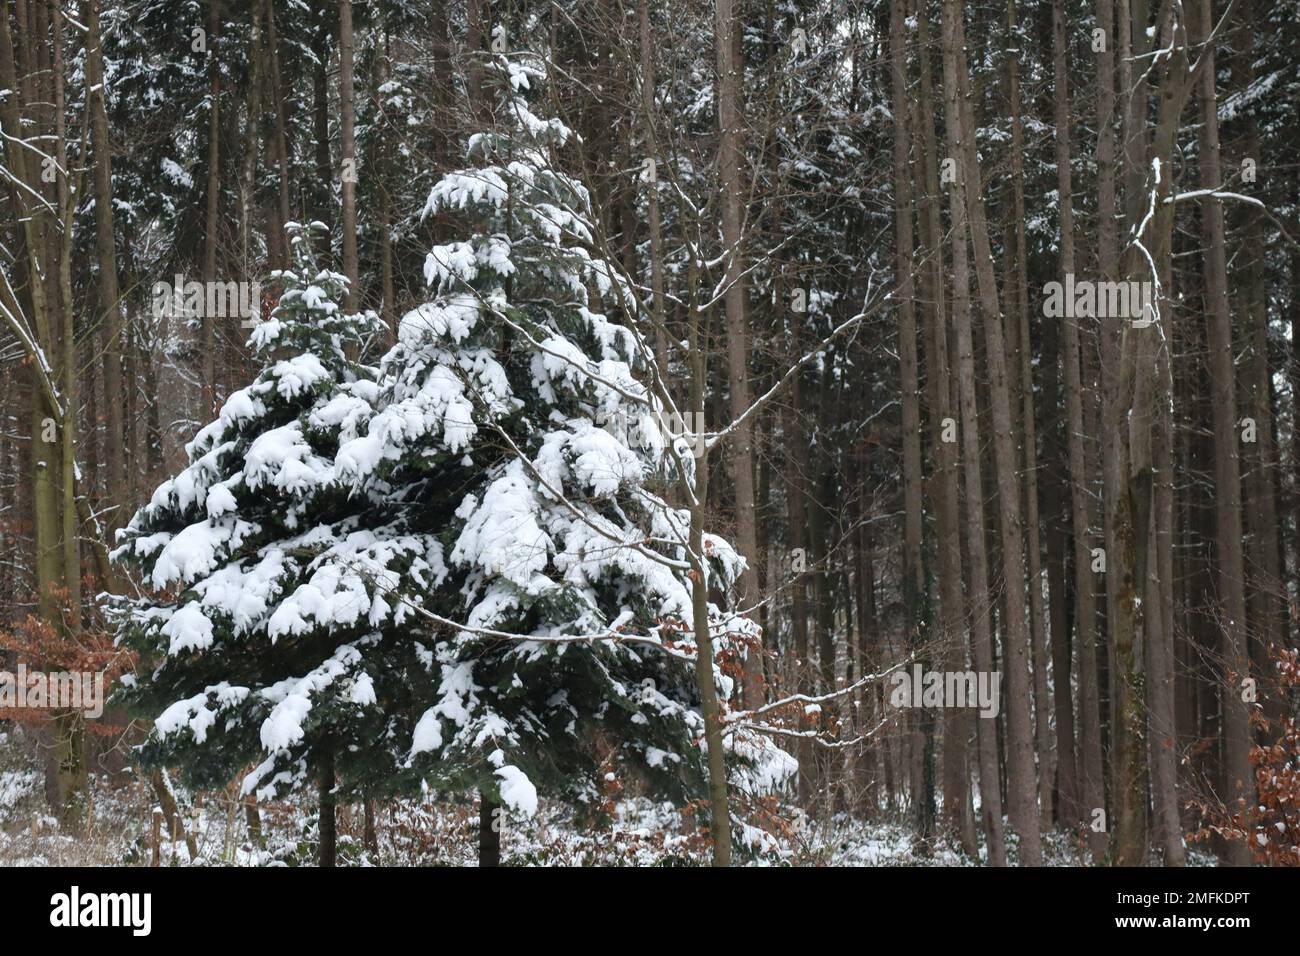 two Firs in front of a Pine forest Stock Photo